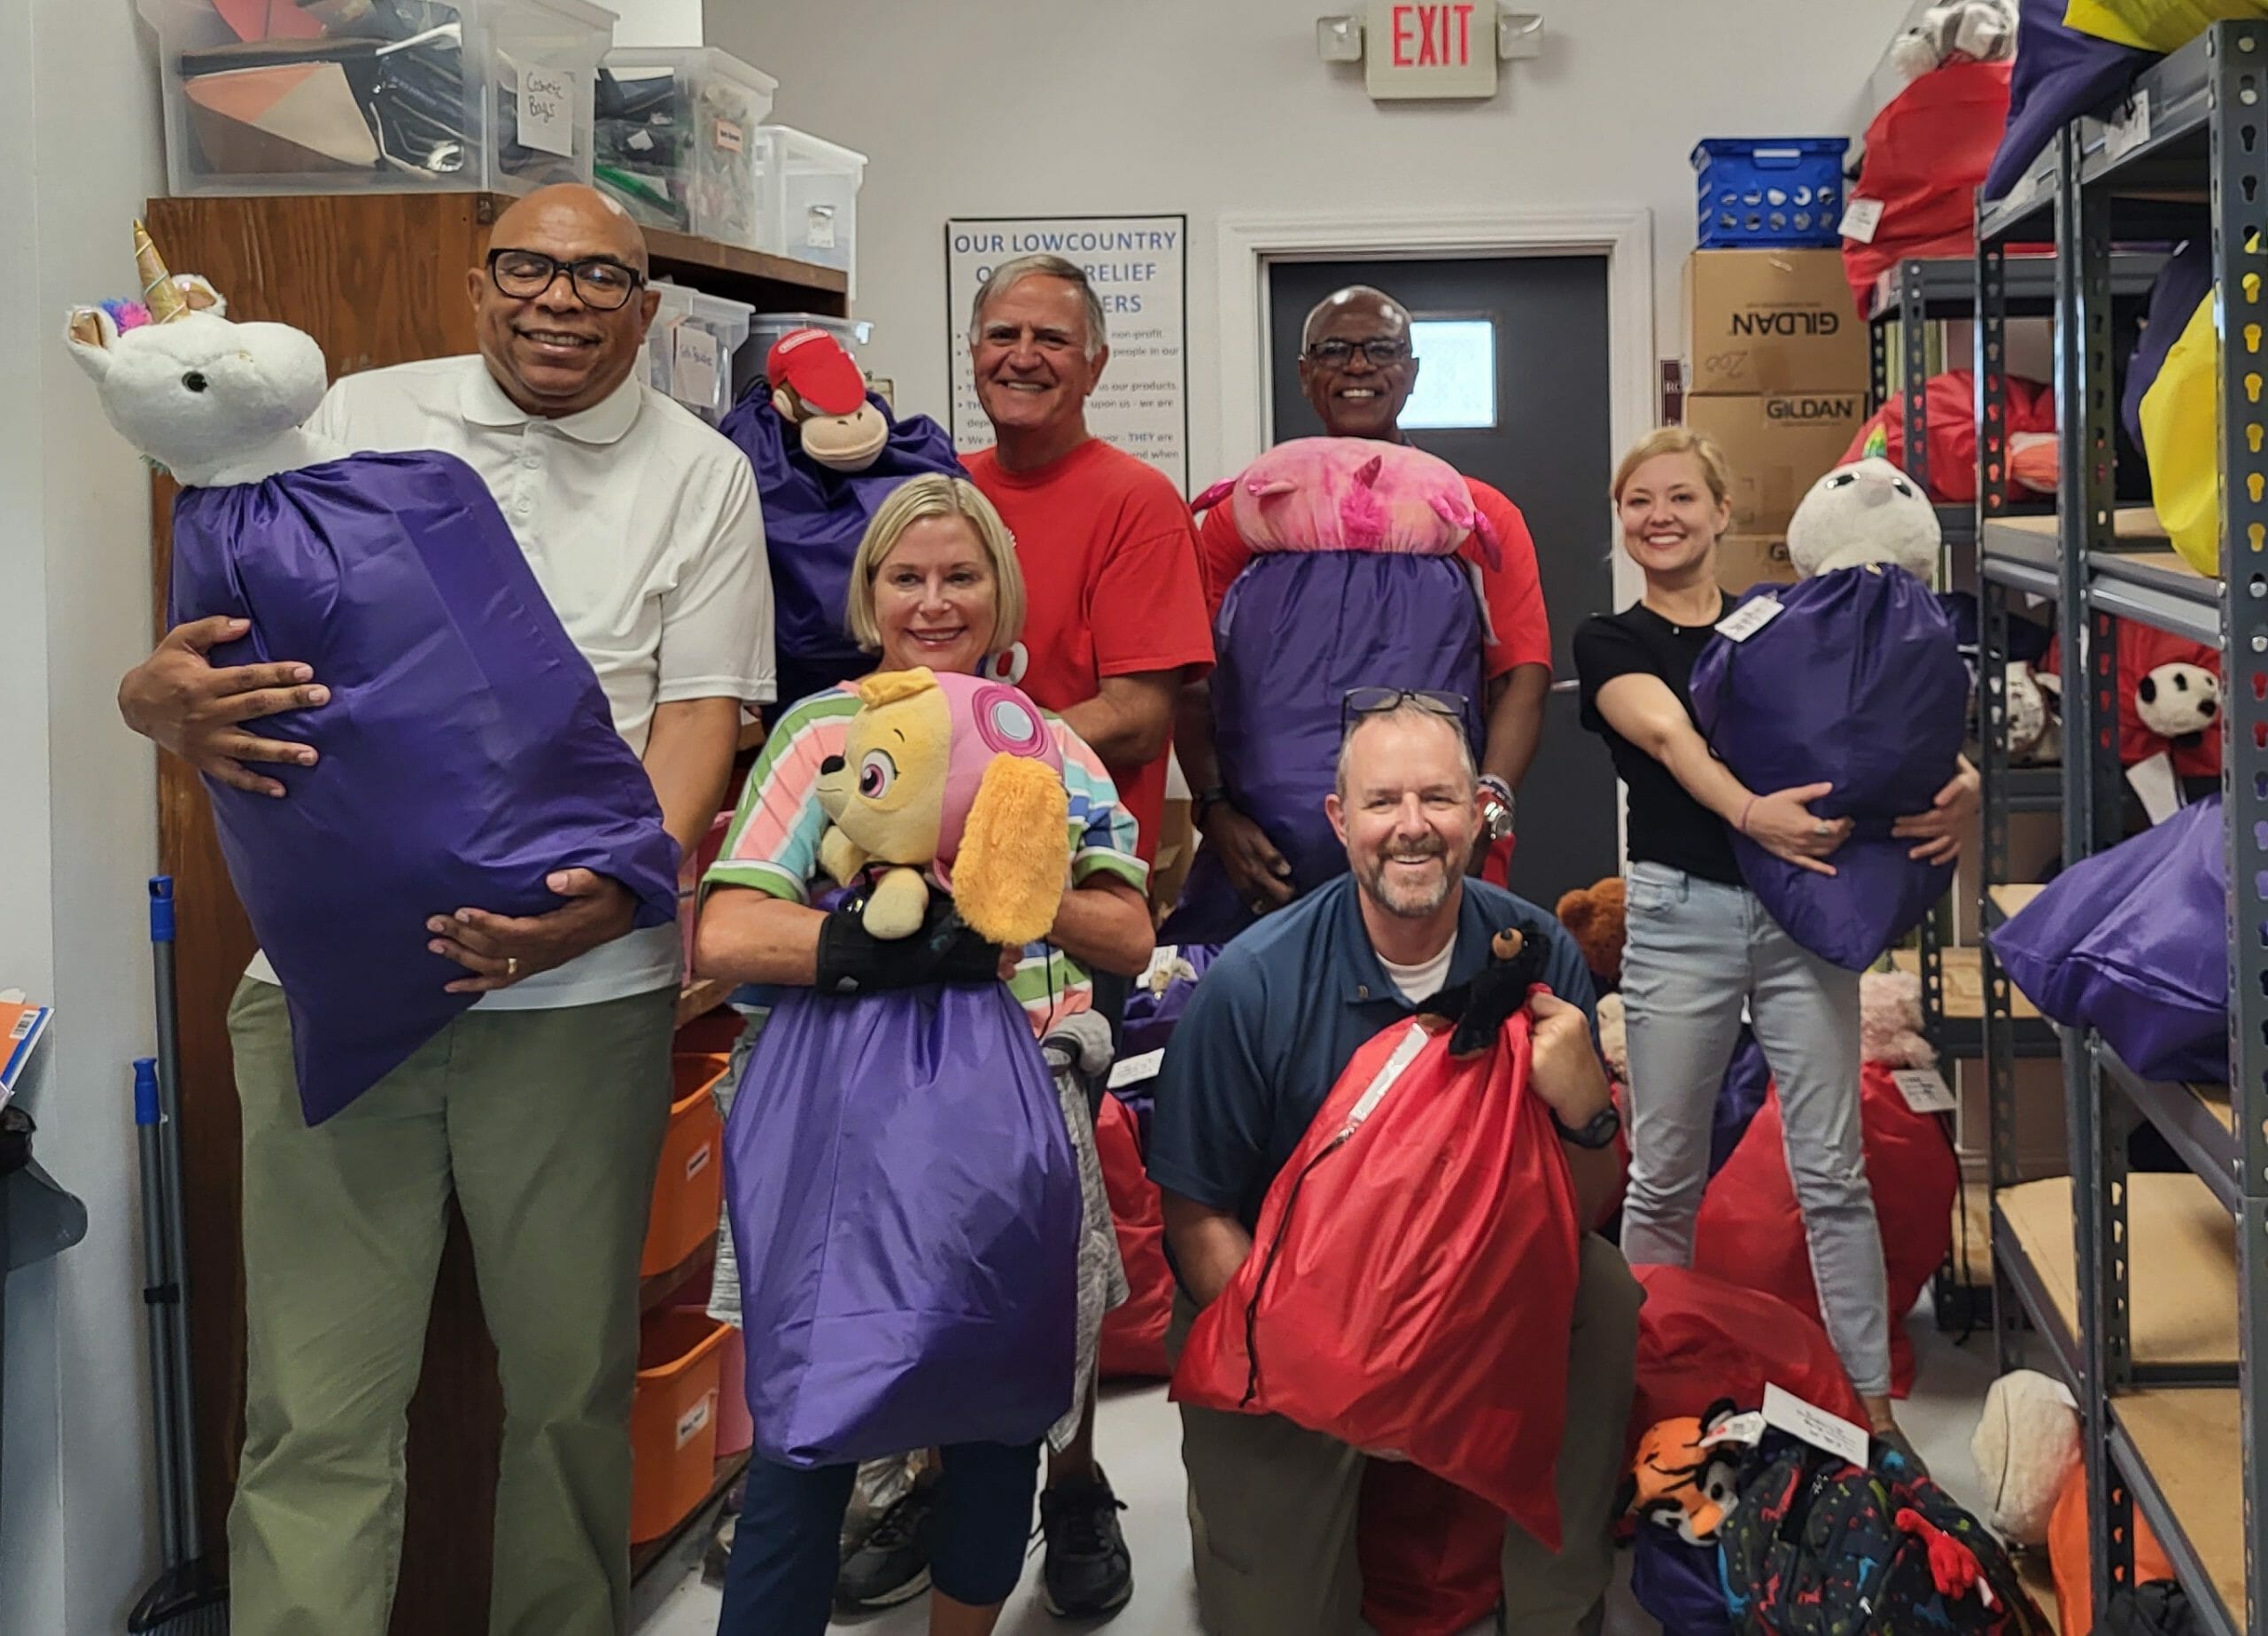 North Charleston Rotary at Lowcountry Orphan Relief